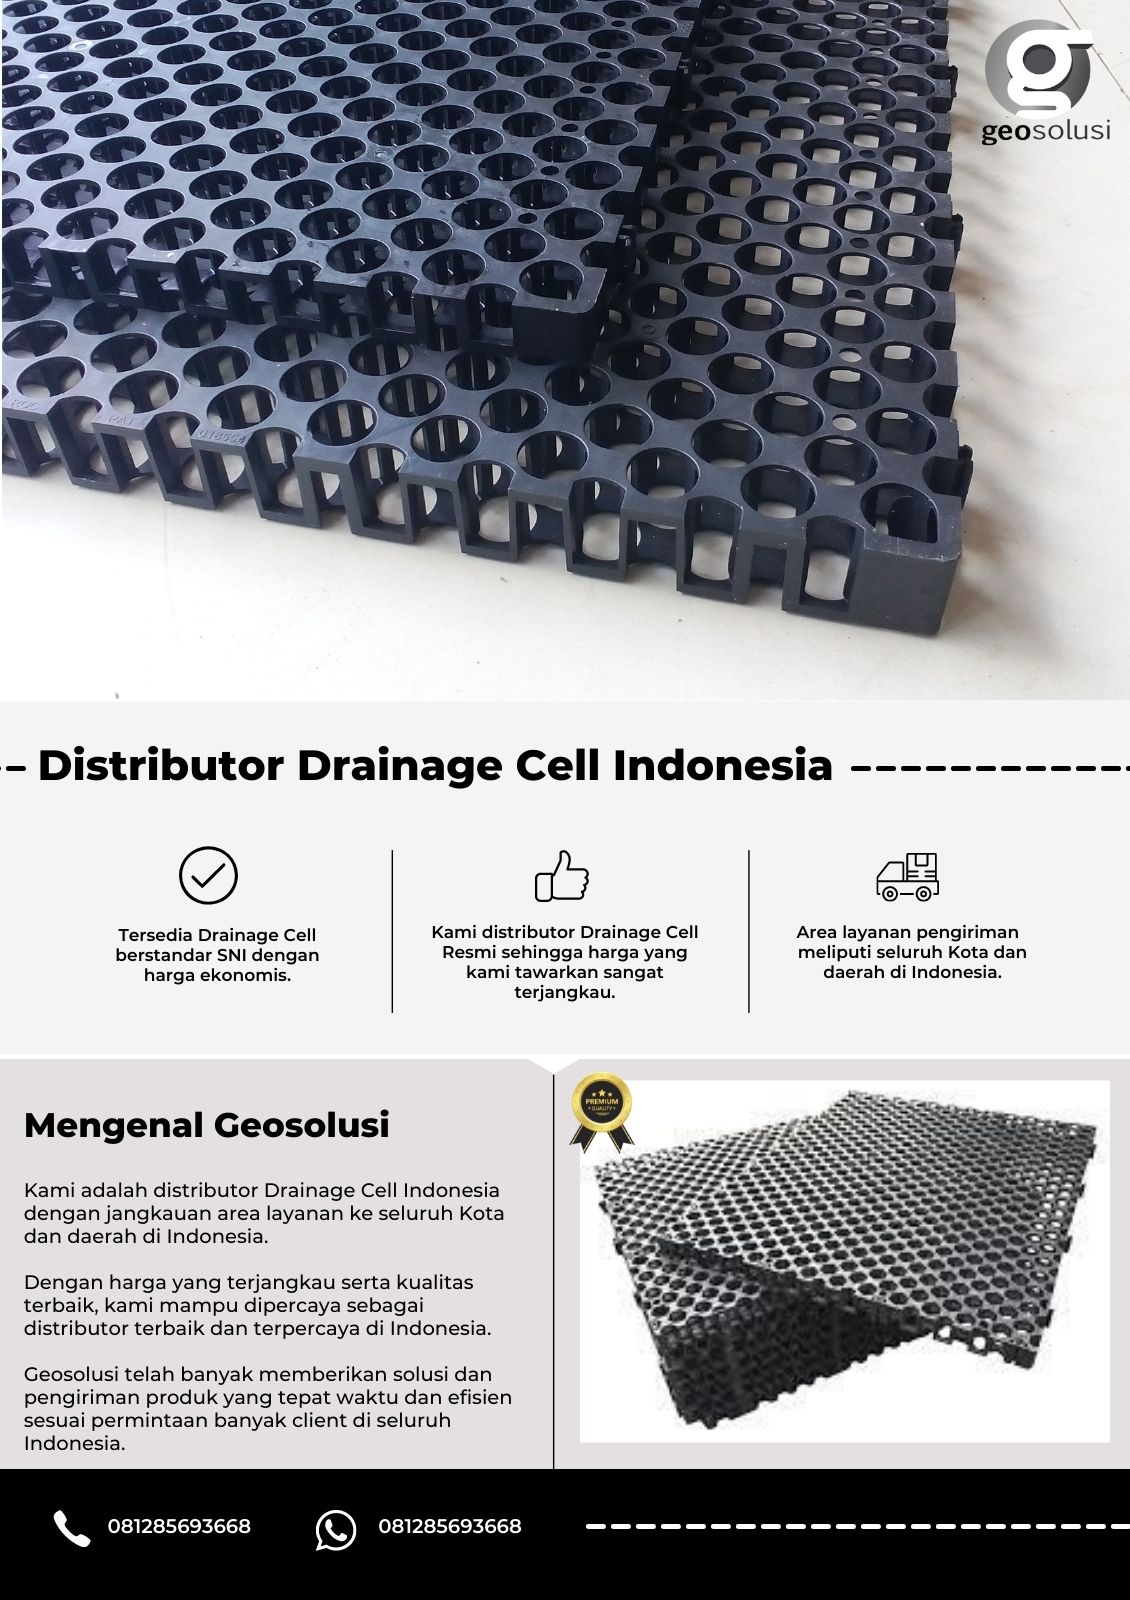 Distributor Drainage Cell Indonesia